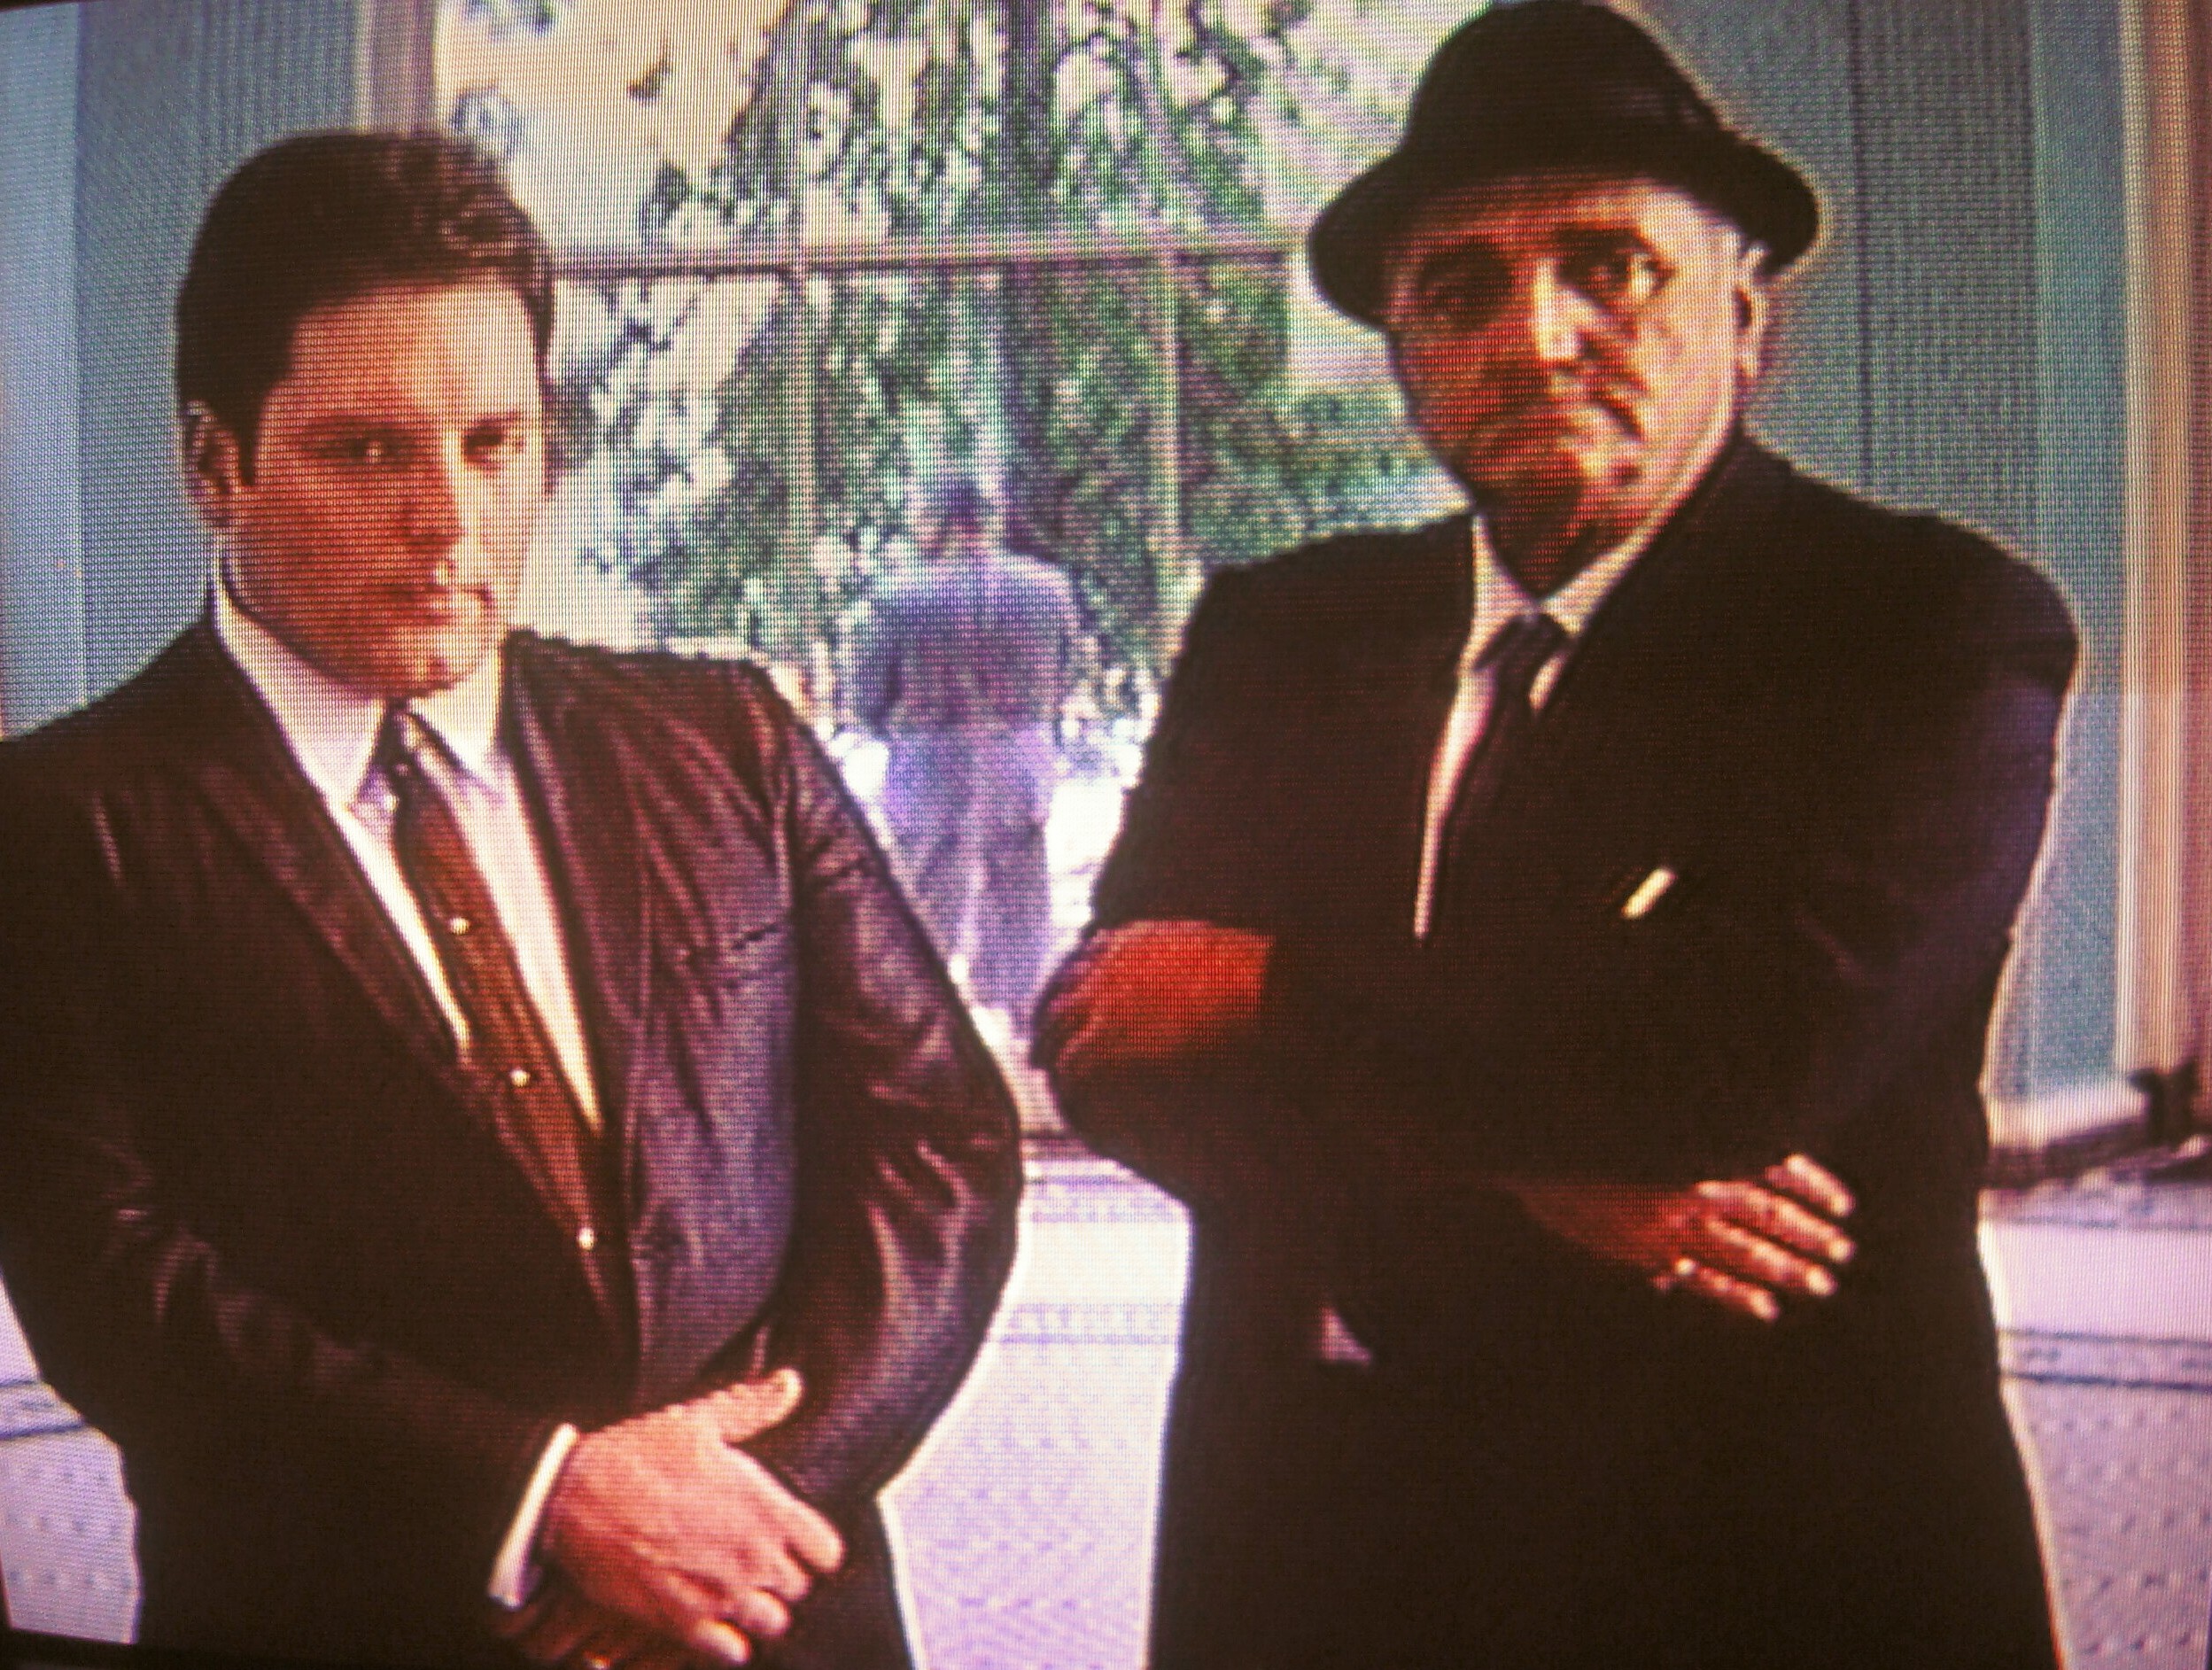 Joe DeBartolo (left) as a mob boss in episode 10, Crime Pays of the TV show 'Crime Story', 1986